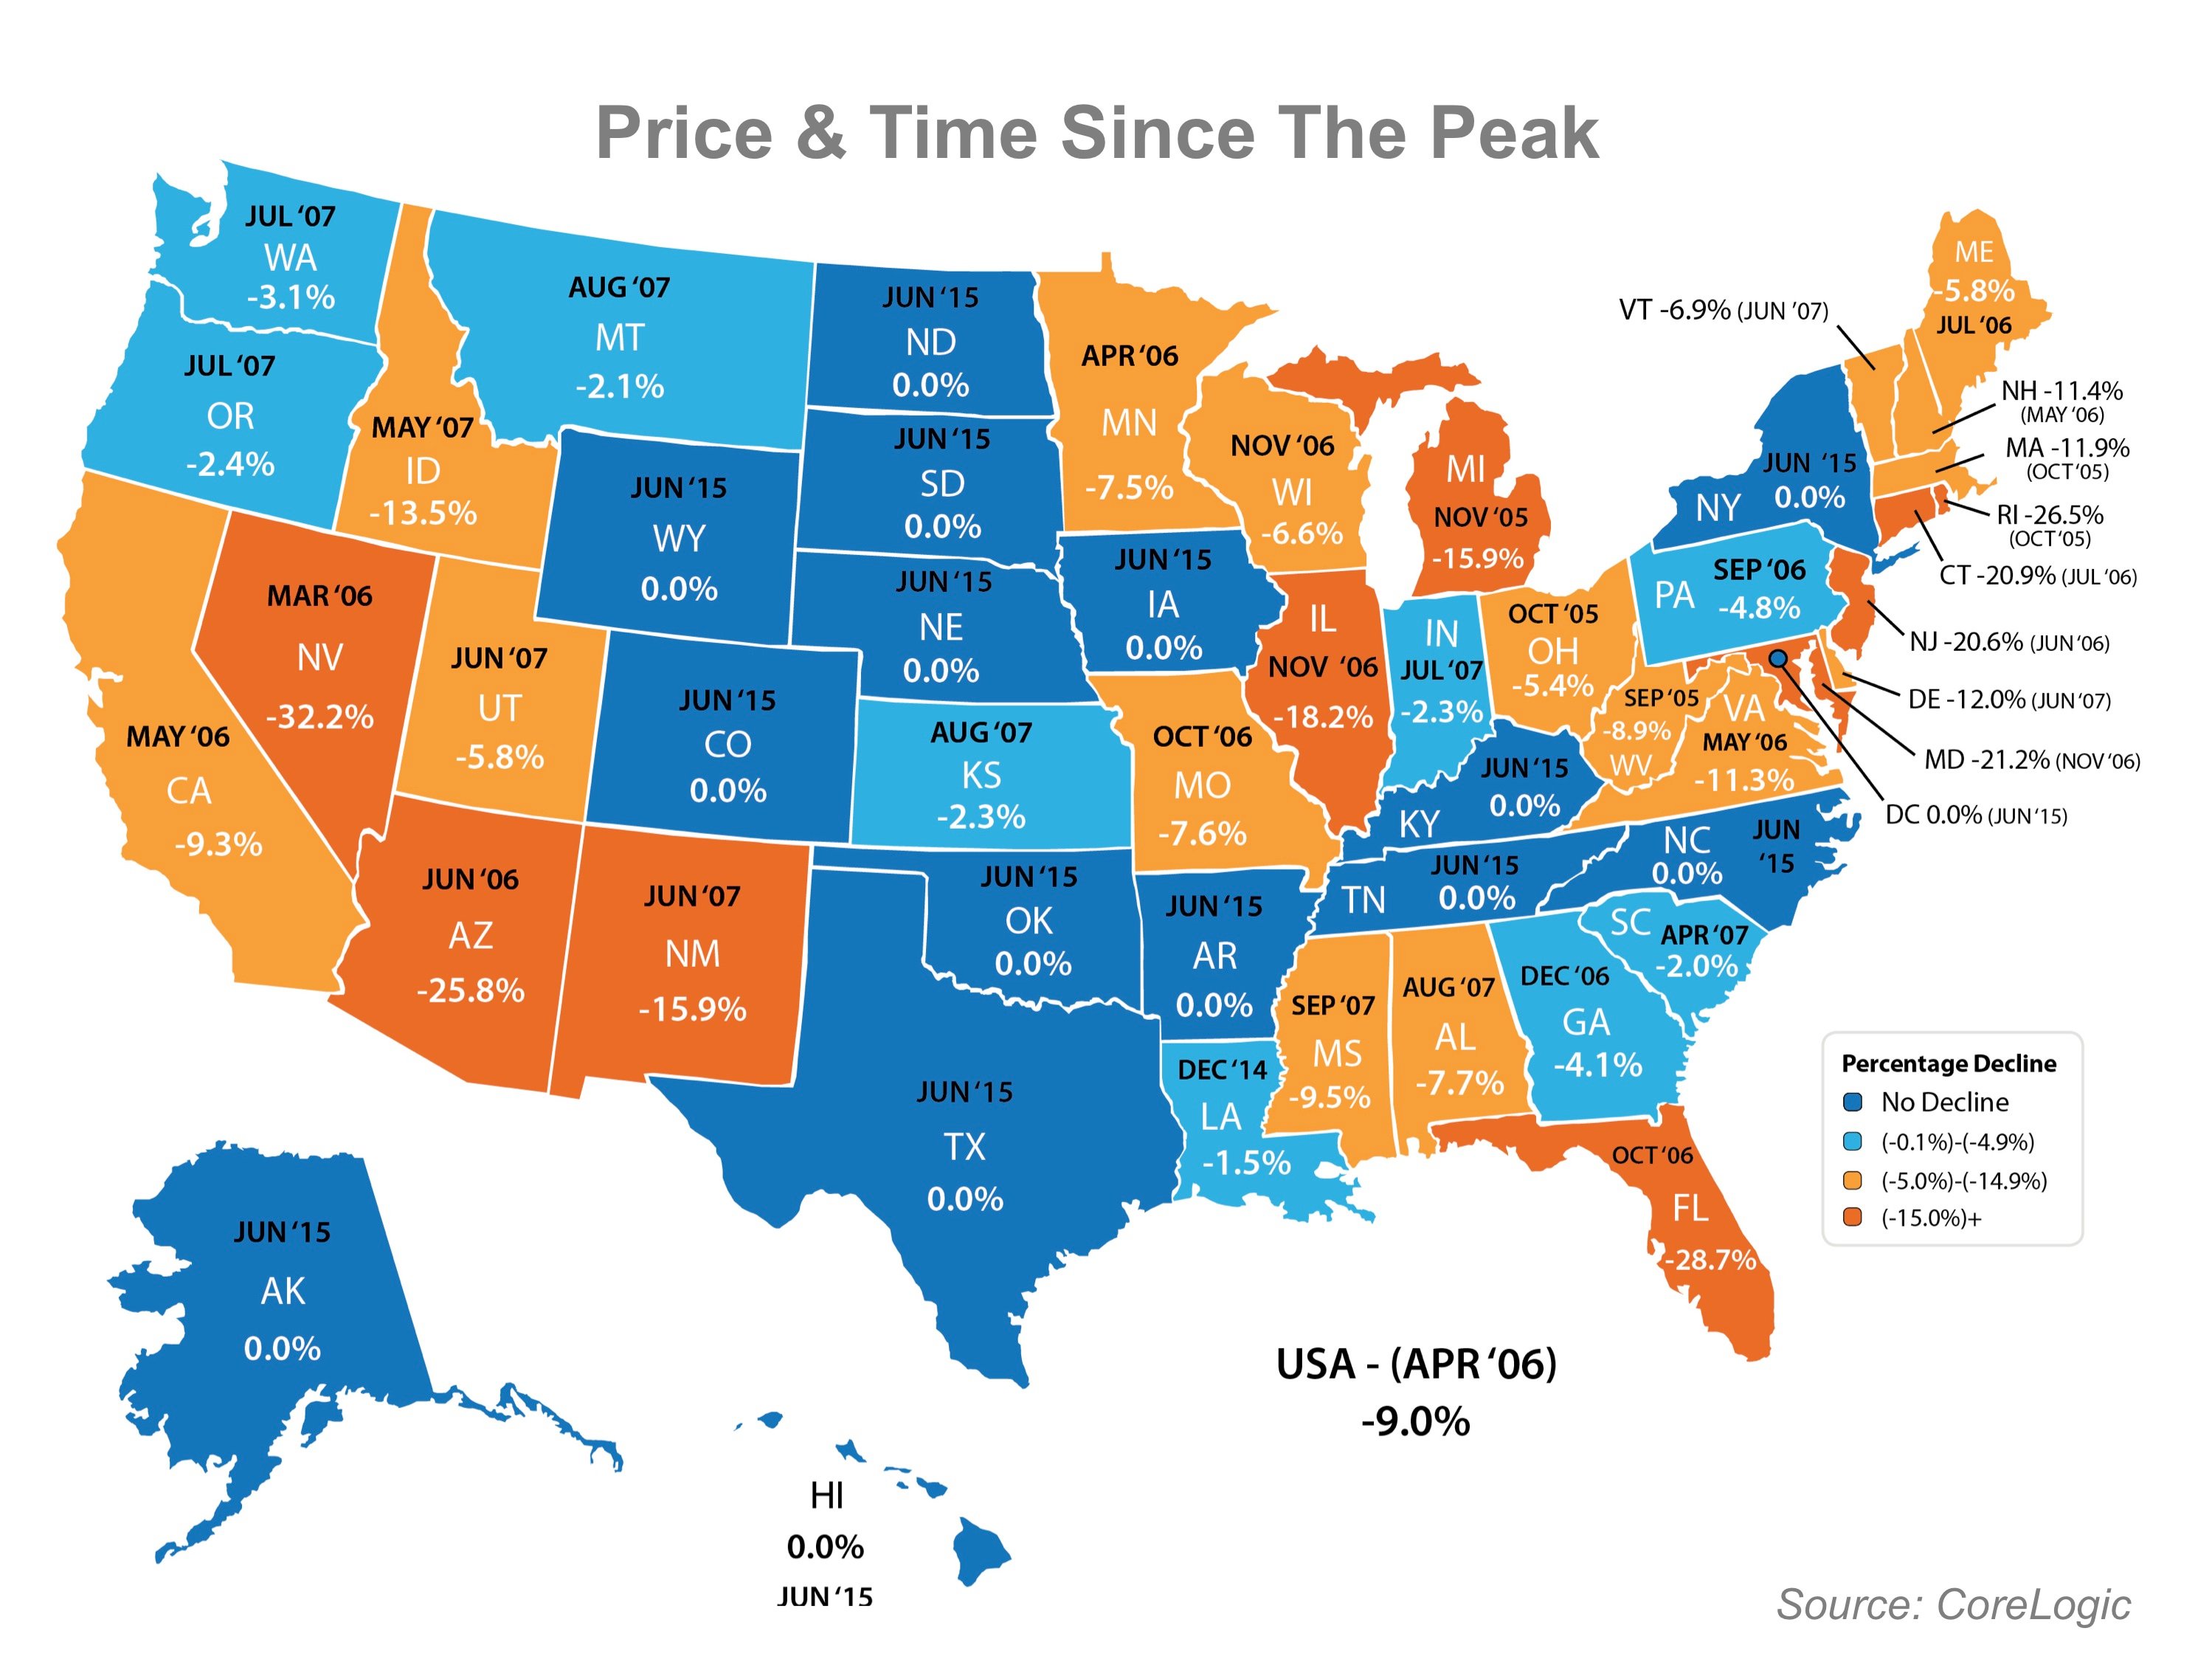 (English) Price & Time Since The Peak Map Updated